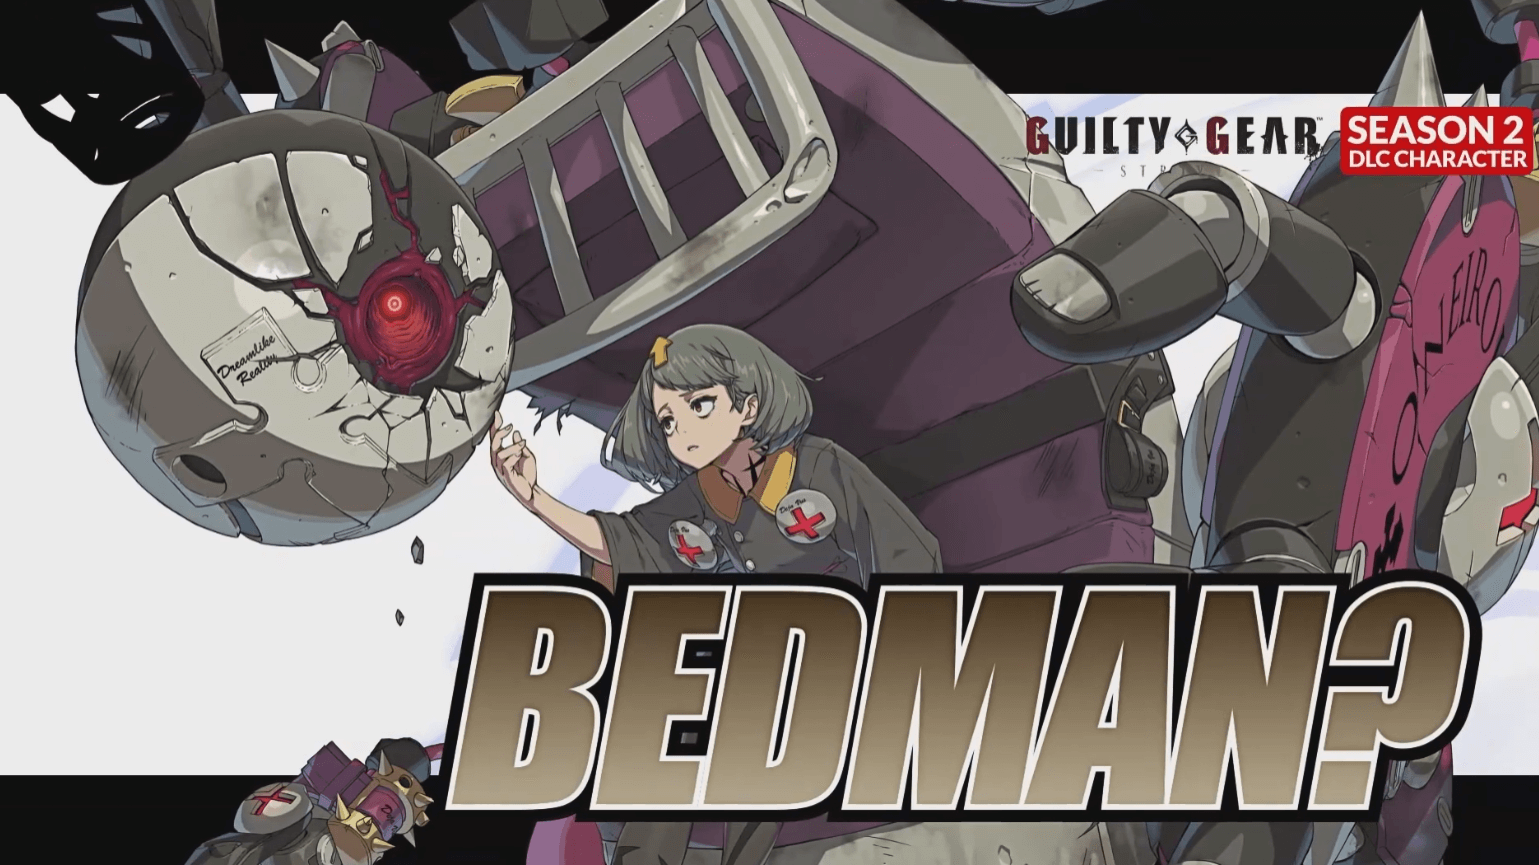 Bedman? Yes! Joining The Guilty Gear Strive Roster on April 6th!